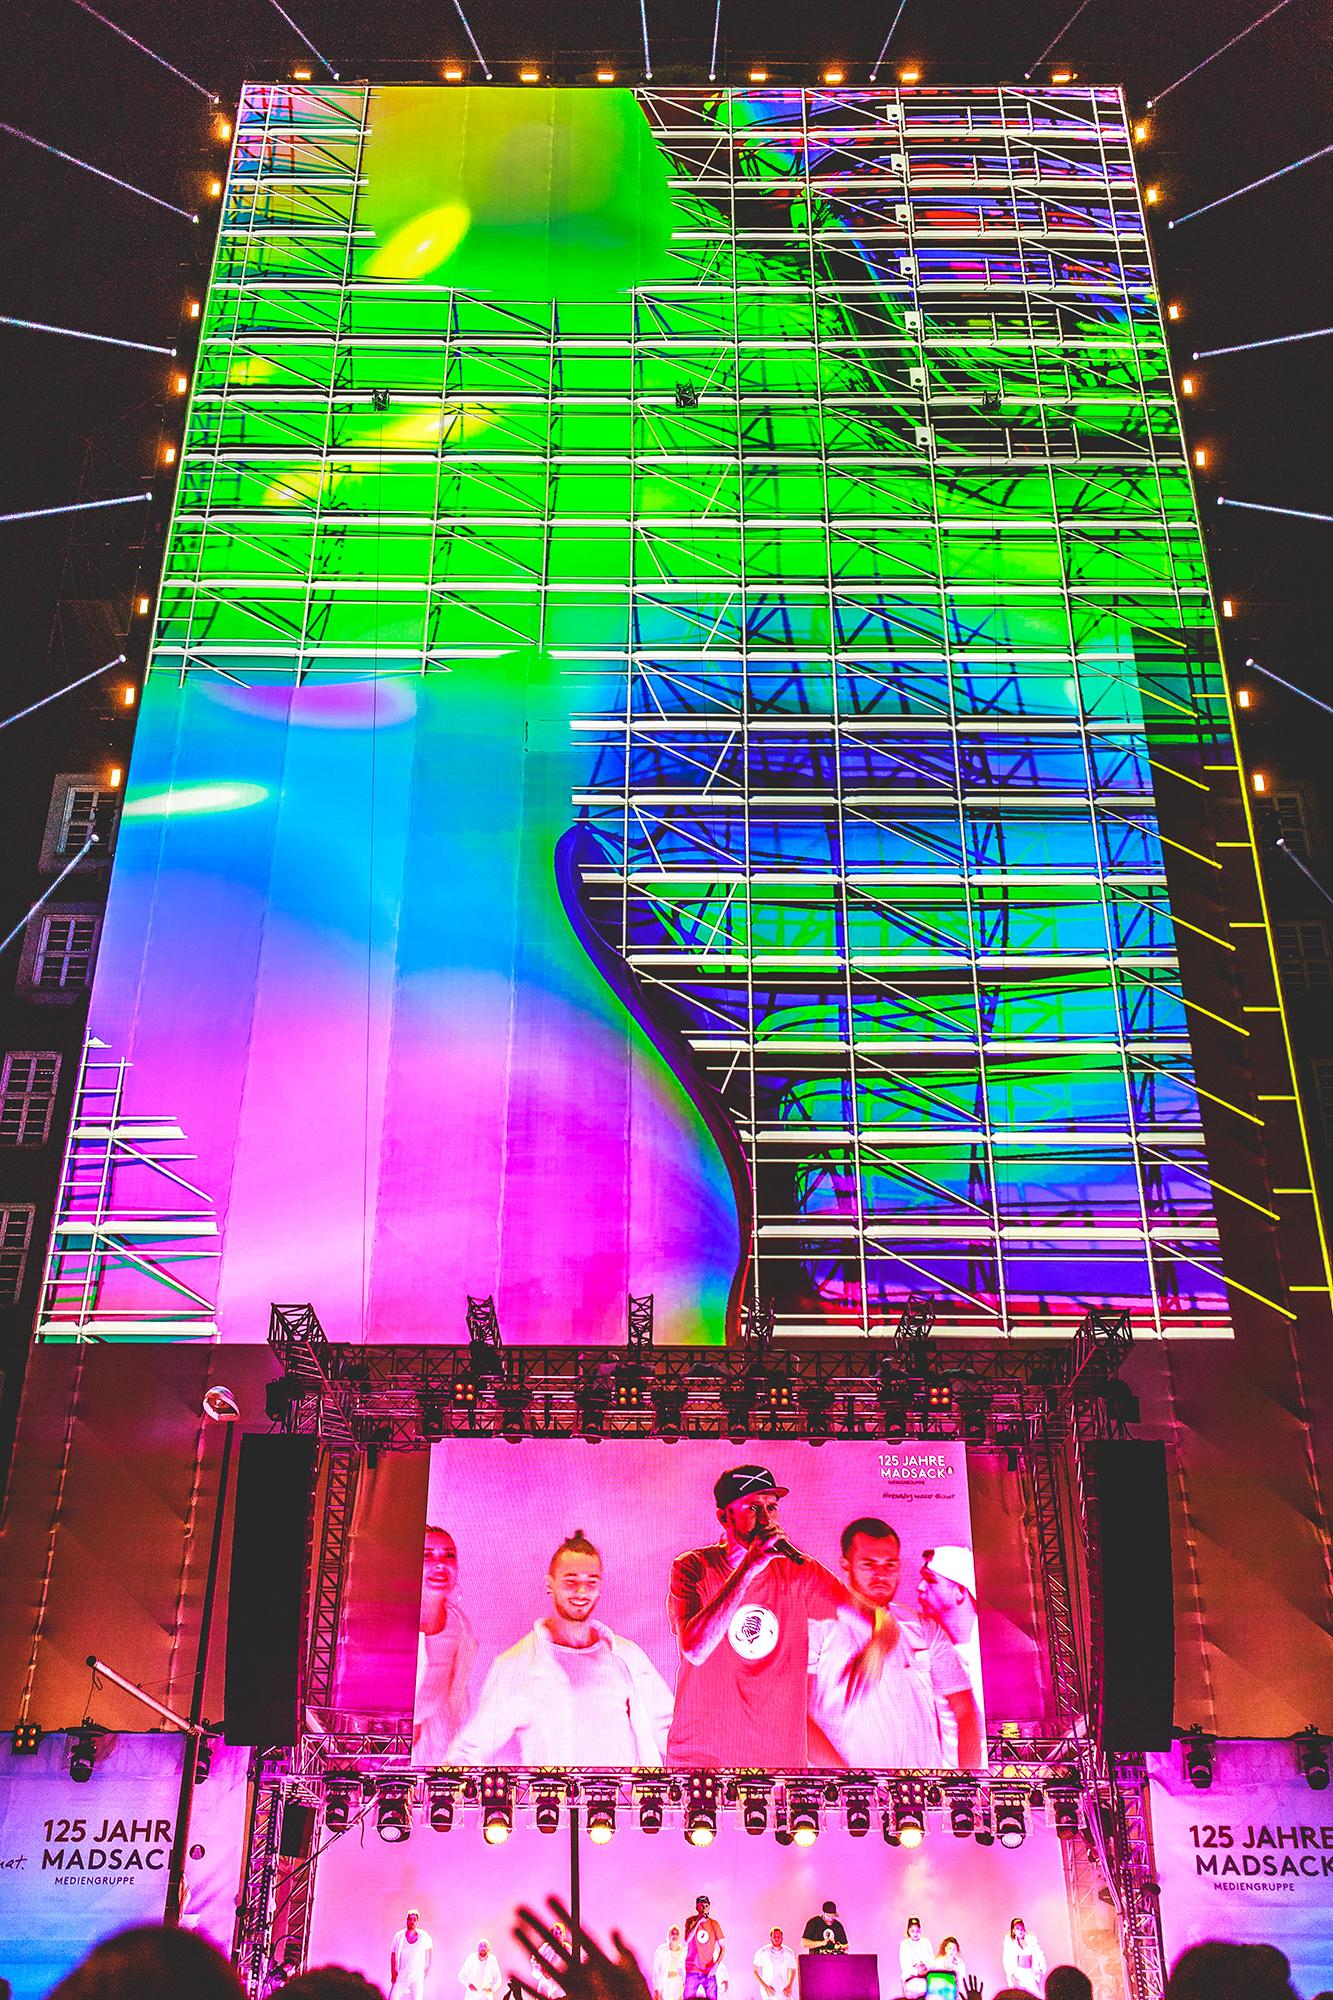 Video mapping of lava lamp like neon shapes over a scaffolding pattern on a large vertical stage. A large crowd watches a musician outdoors.